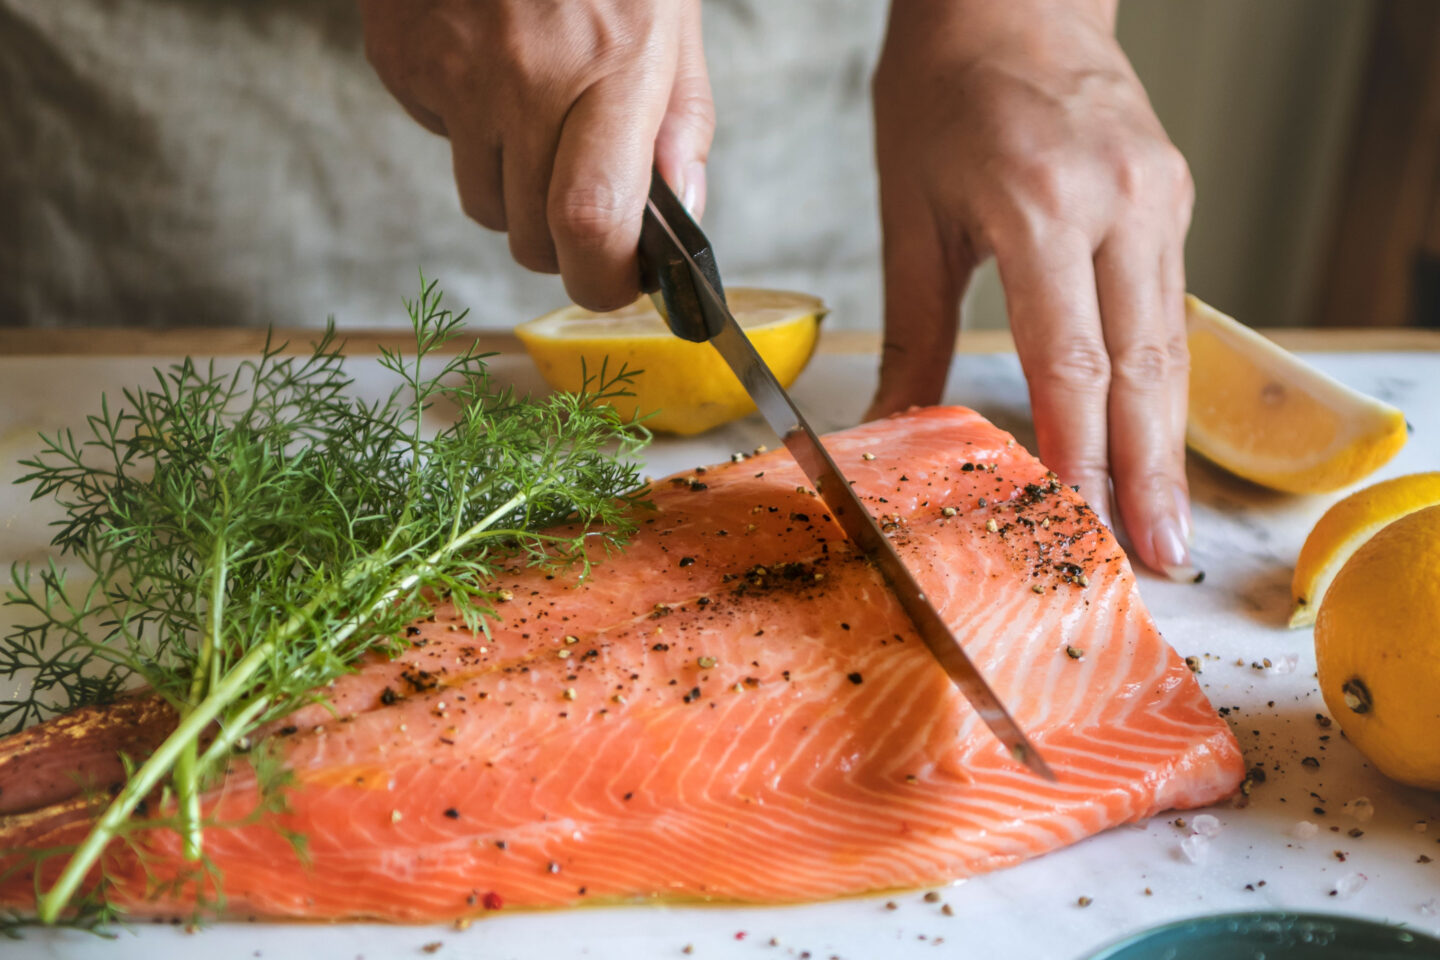 chef cuts up salmon seasoned with dill salt and pepper